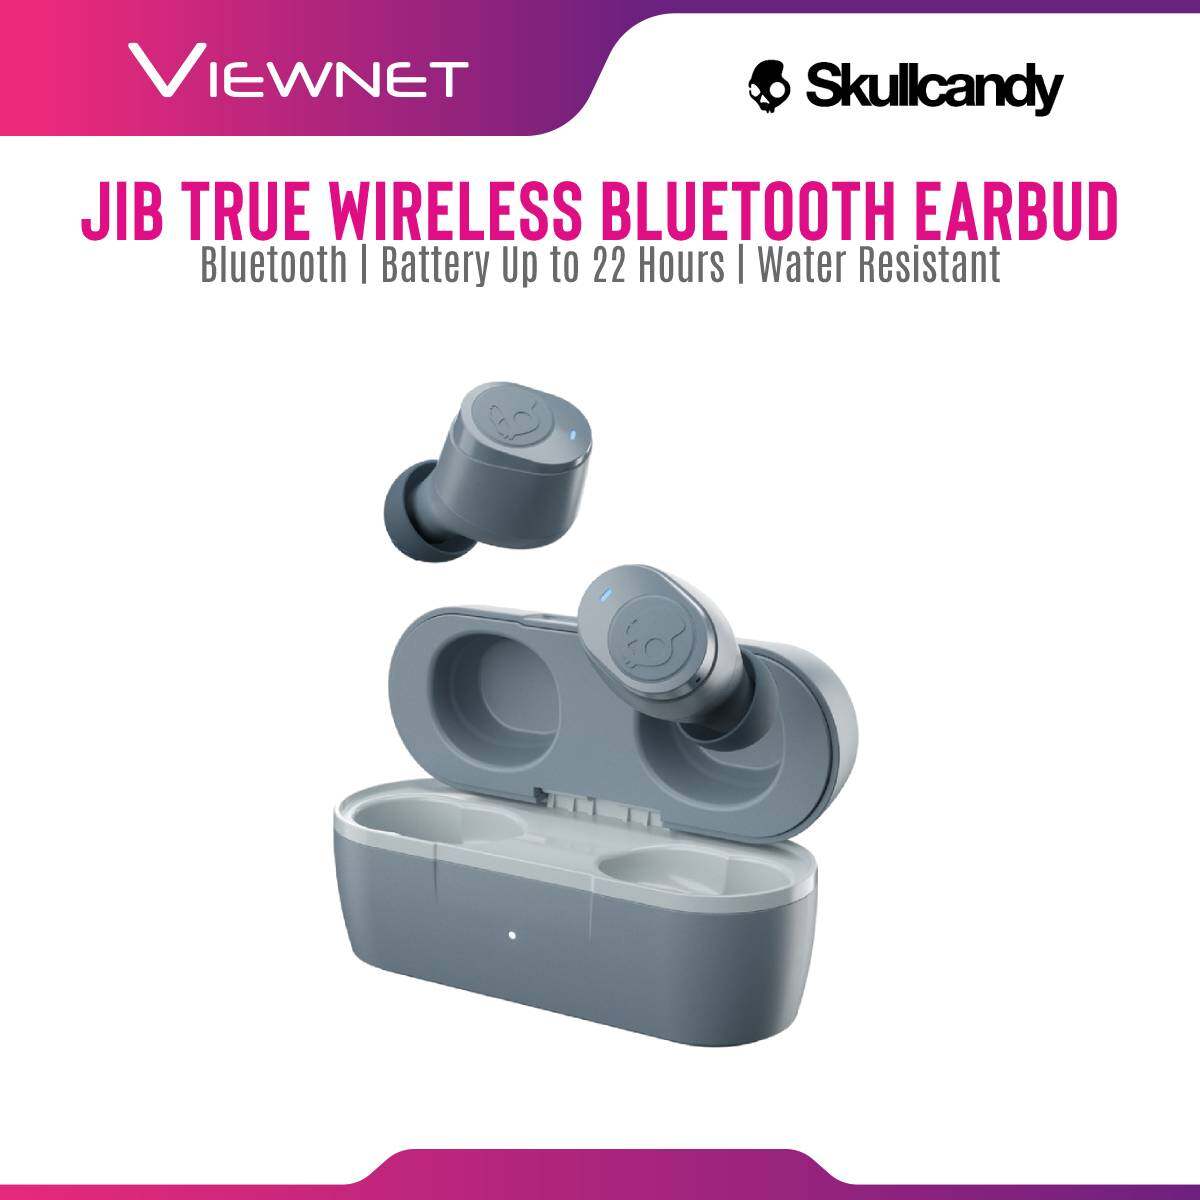 Skullcandy JIB Ture wireless Bluetooth with IPX4 Sweat and Water Resistant , 22 Hours Total Battery